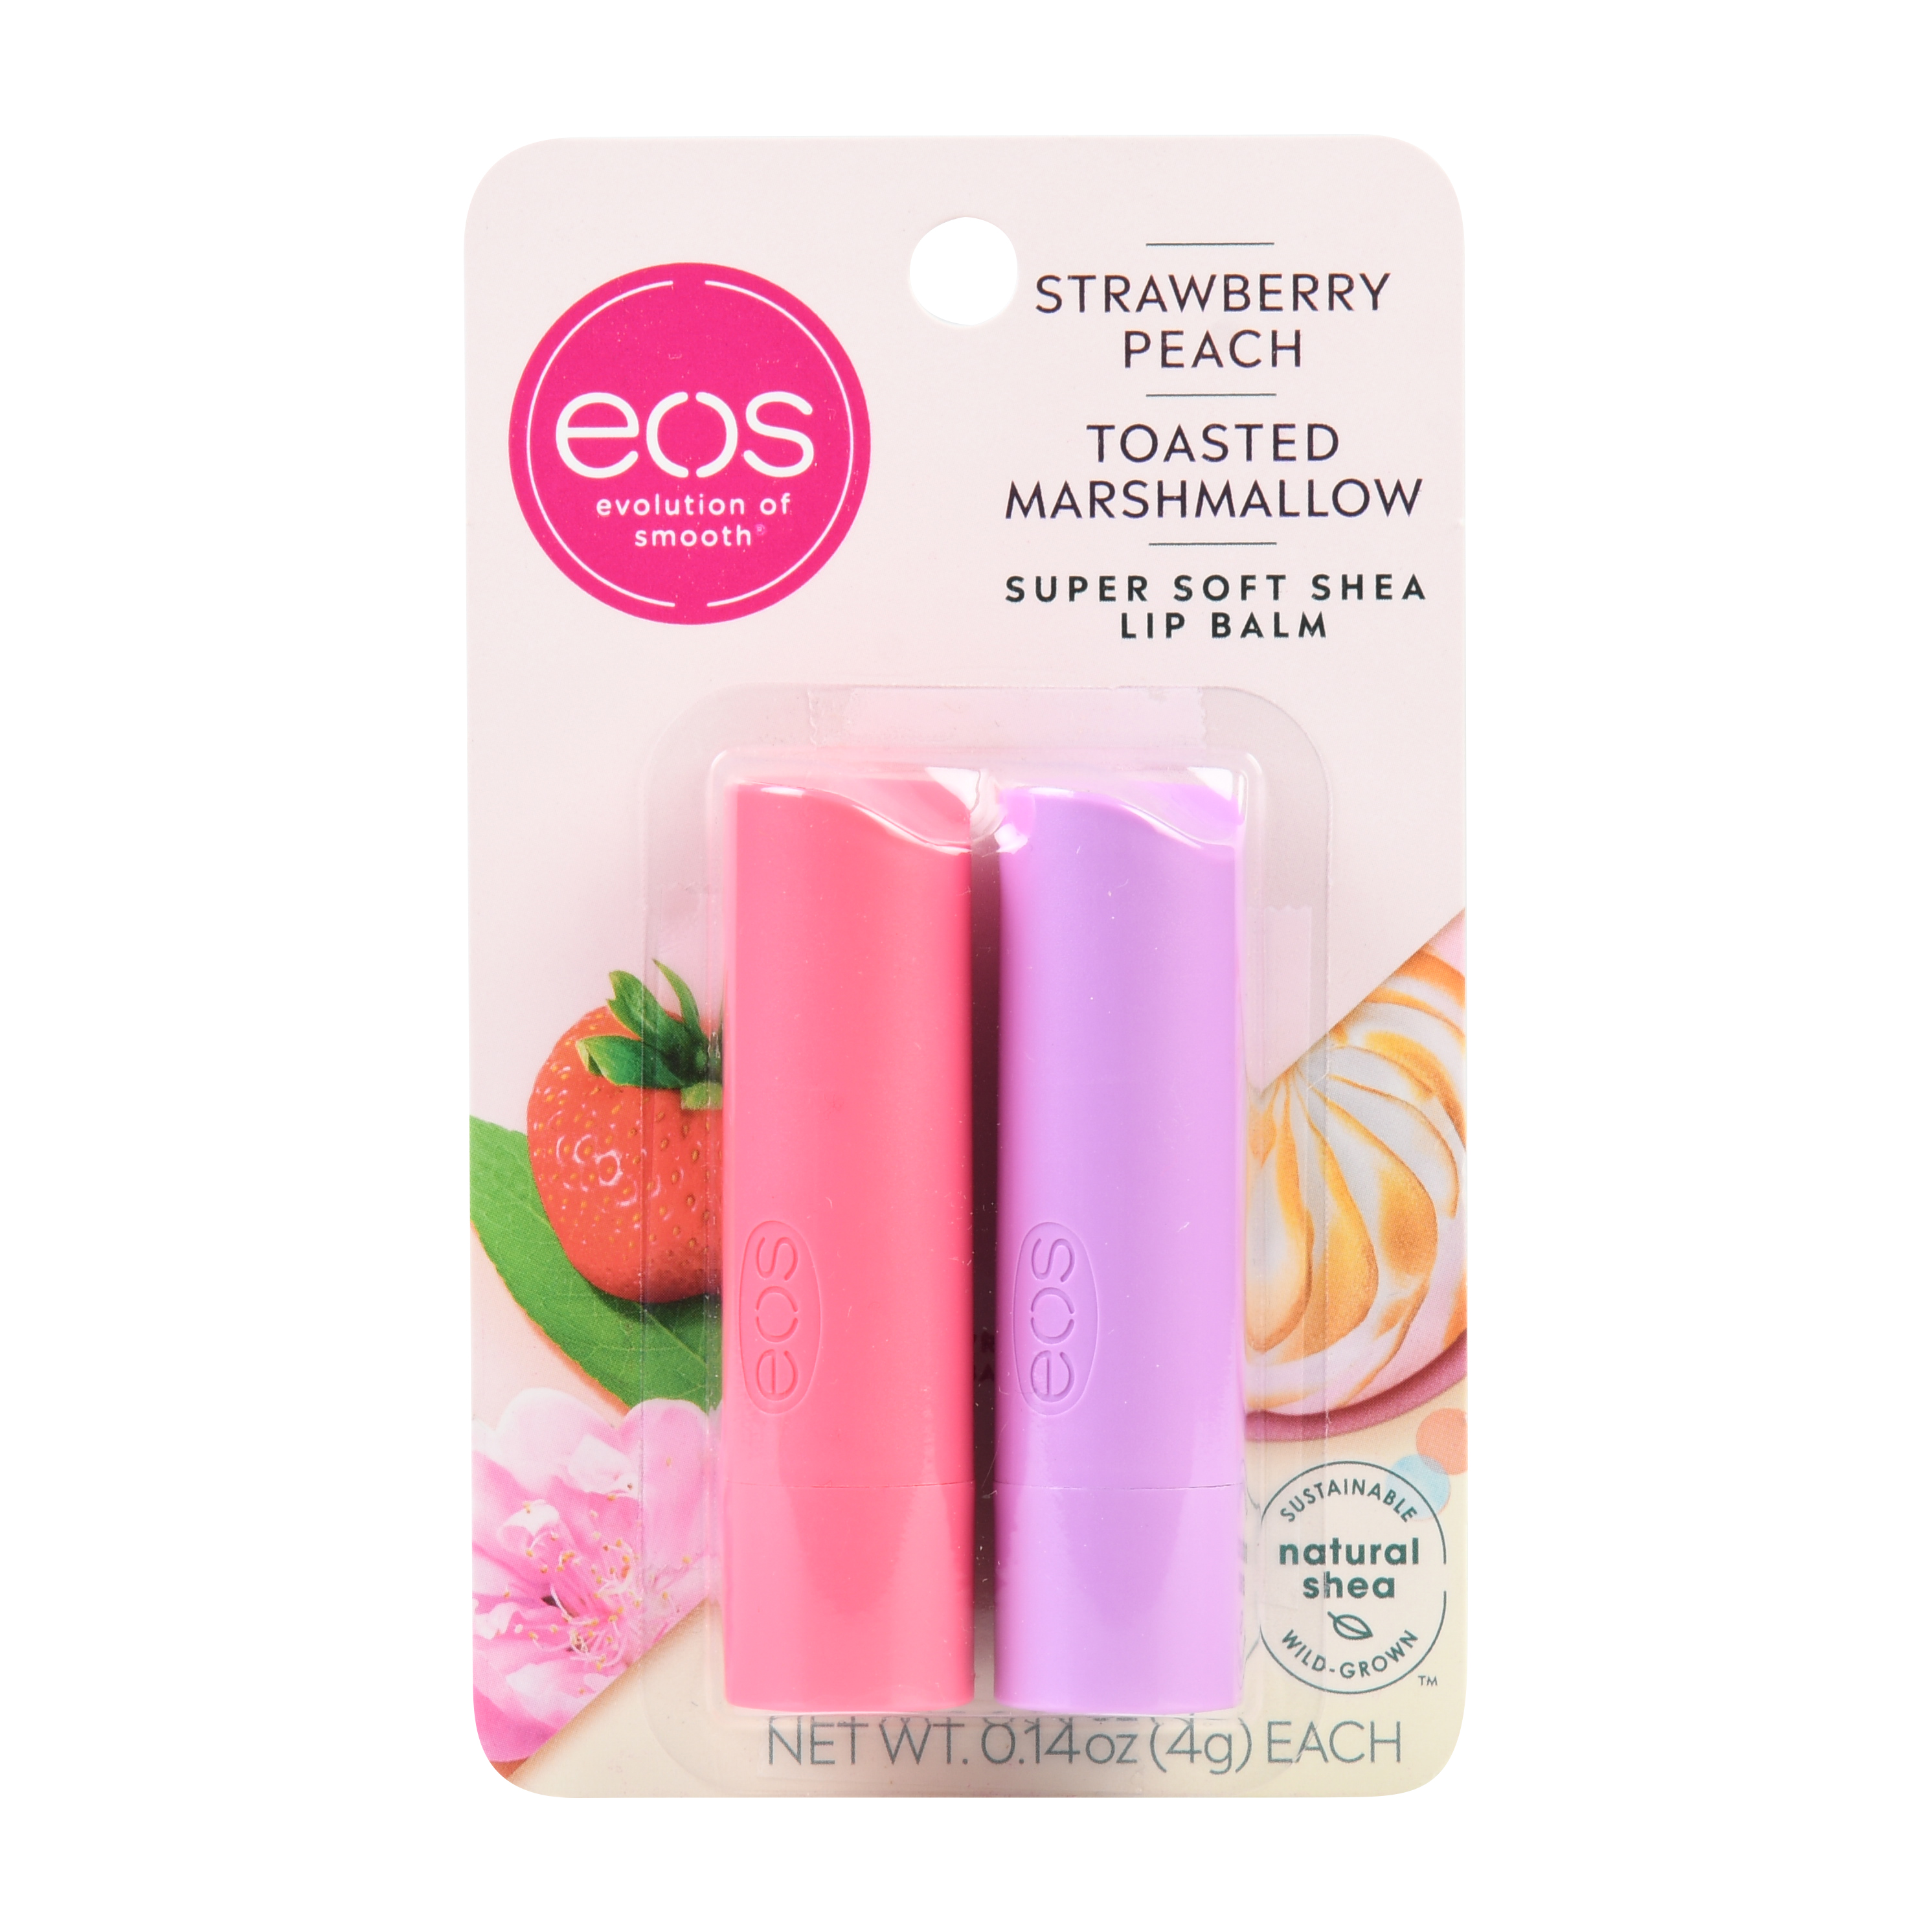 eos Super Soft Shea Lip Balm Stick - Strawberry Peach and Toasted Marshmallow | 0.14 oz | 2 count - image 1 of 10